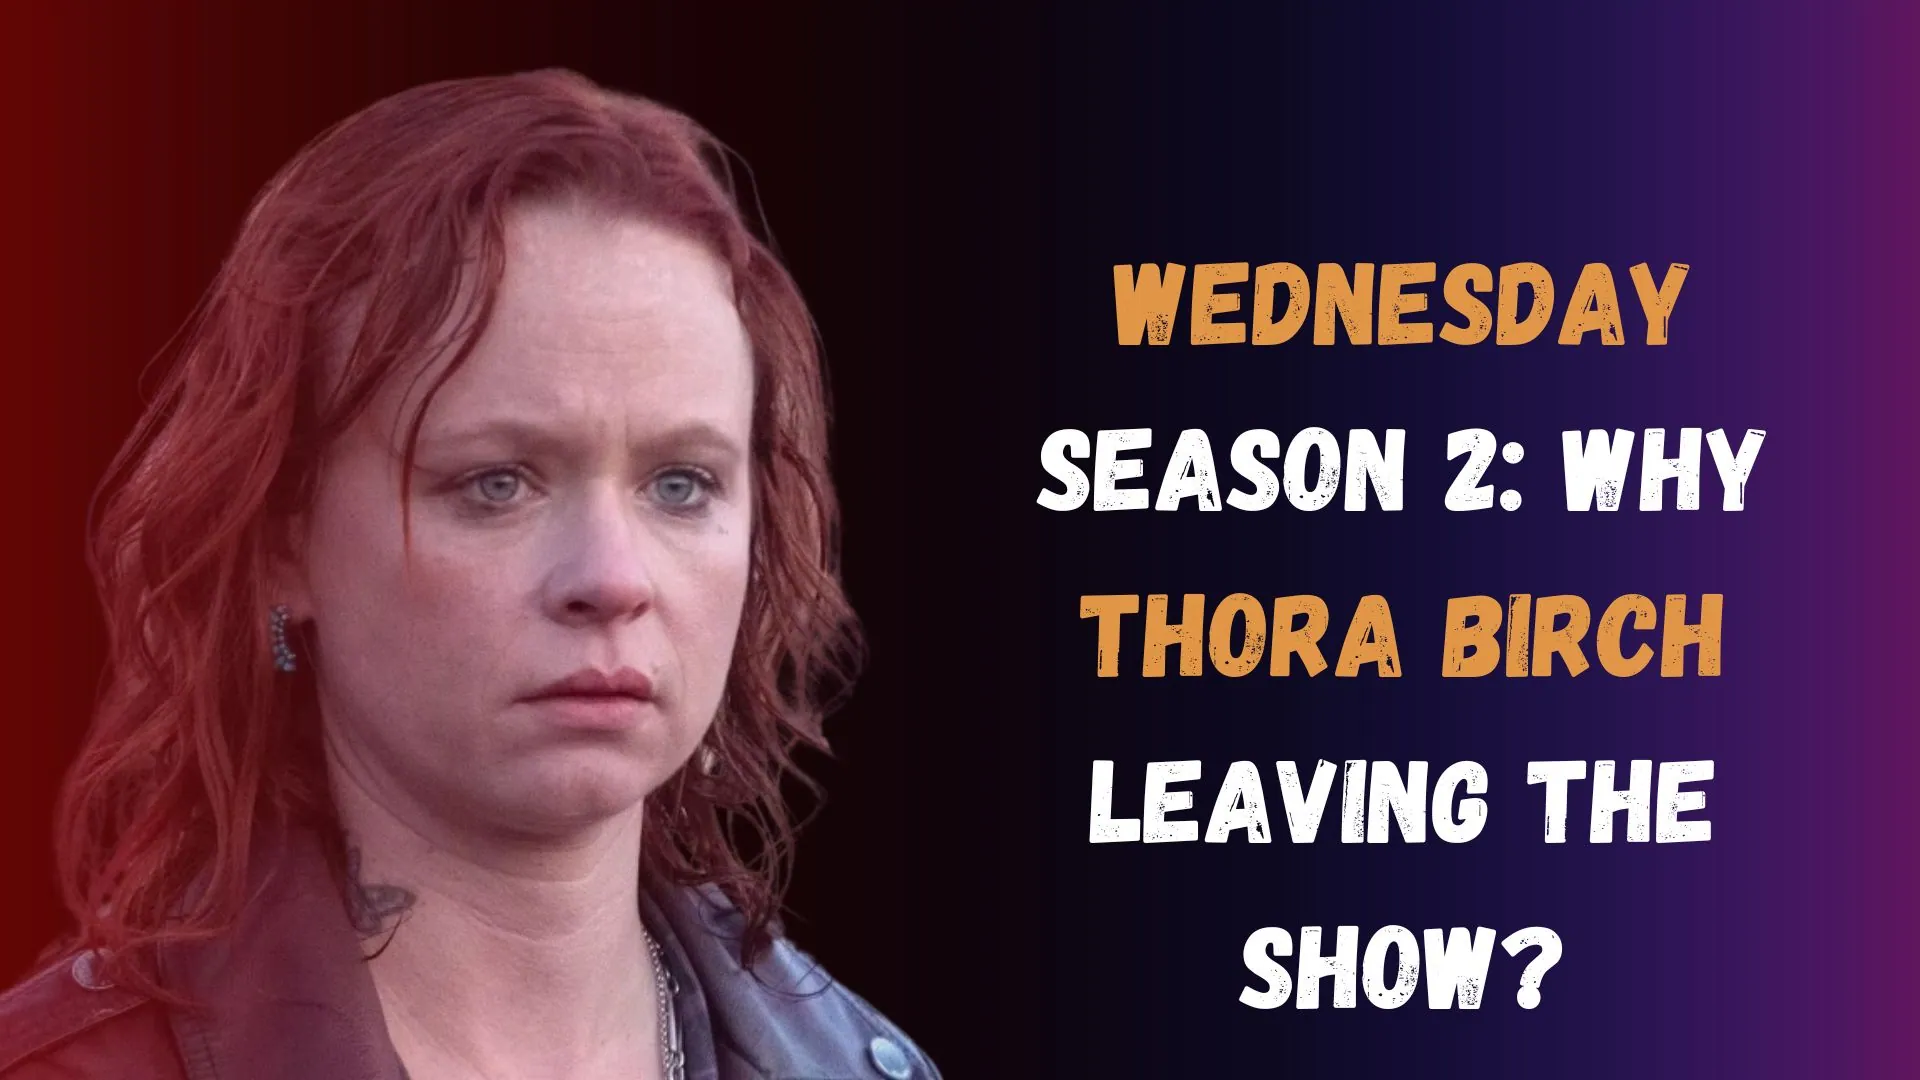 Wednesday Season 2 Why Thora Birch Leaving The Show